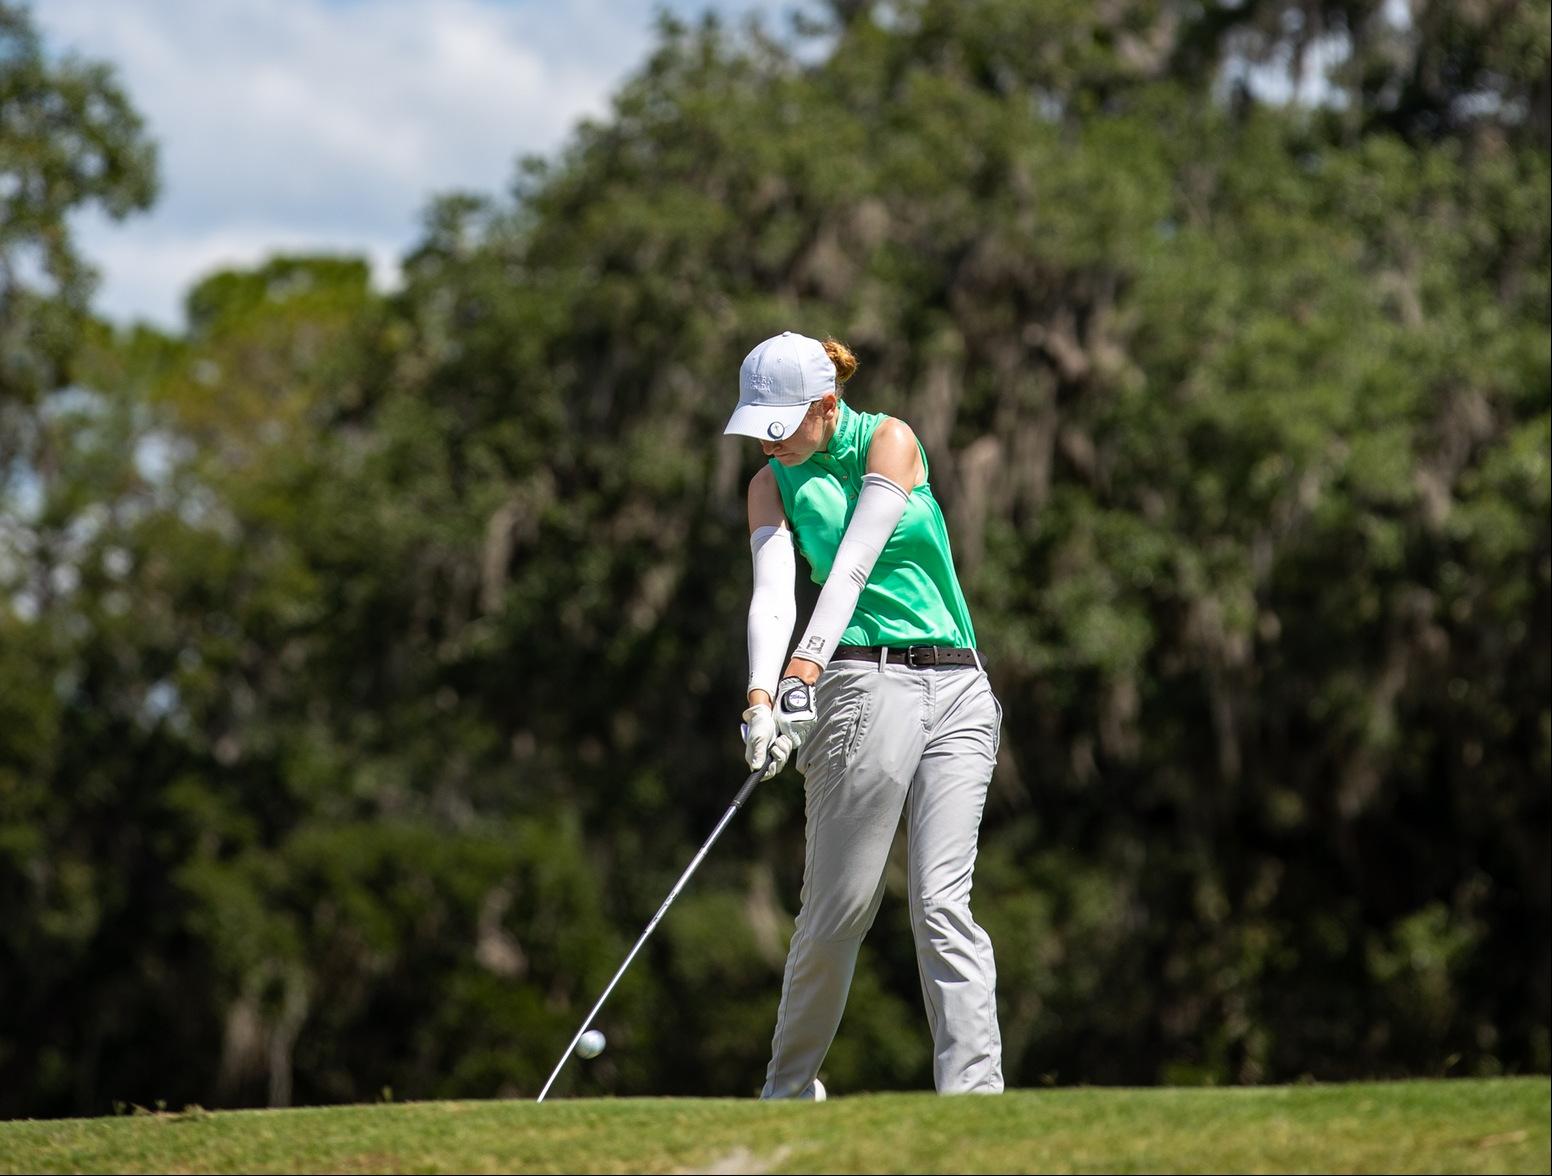 Women's golf team tied for seventh after three rounds at national tournament